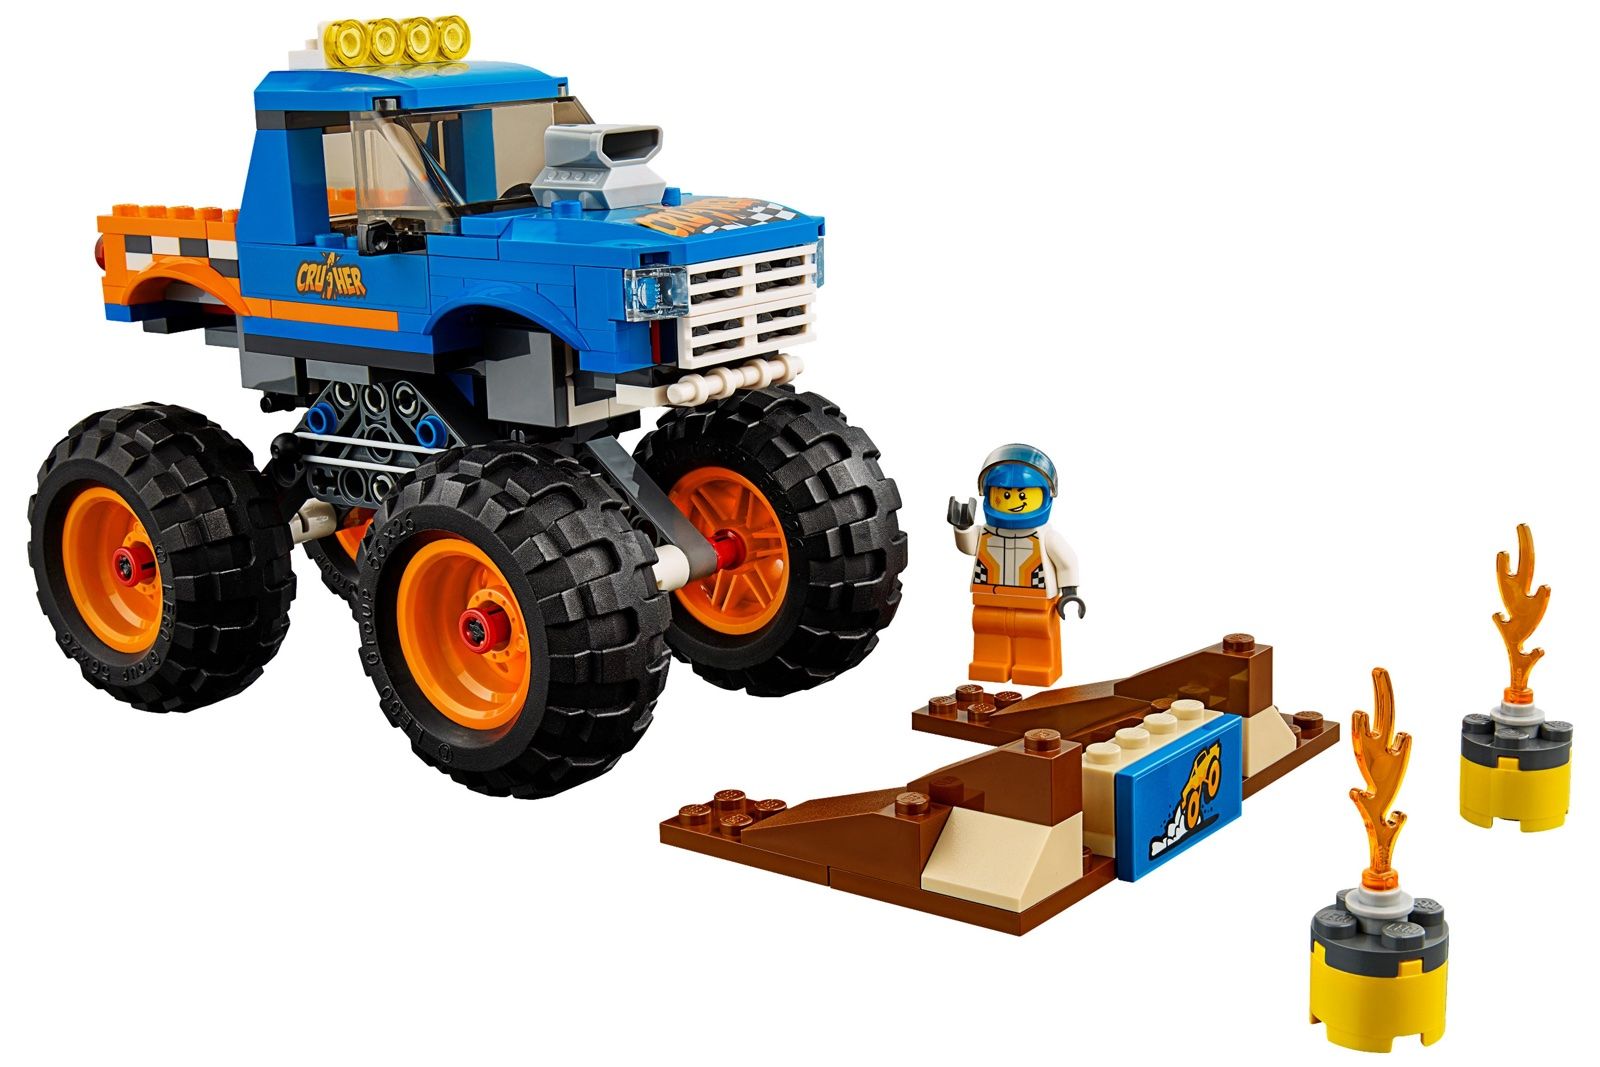 10 best Lego sets 2020 Our favourite Star Wars, Technic, City, Frozen II sets and more image 7